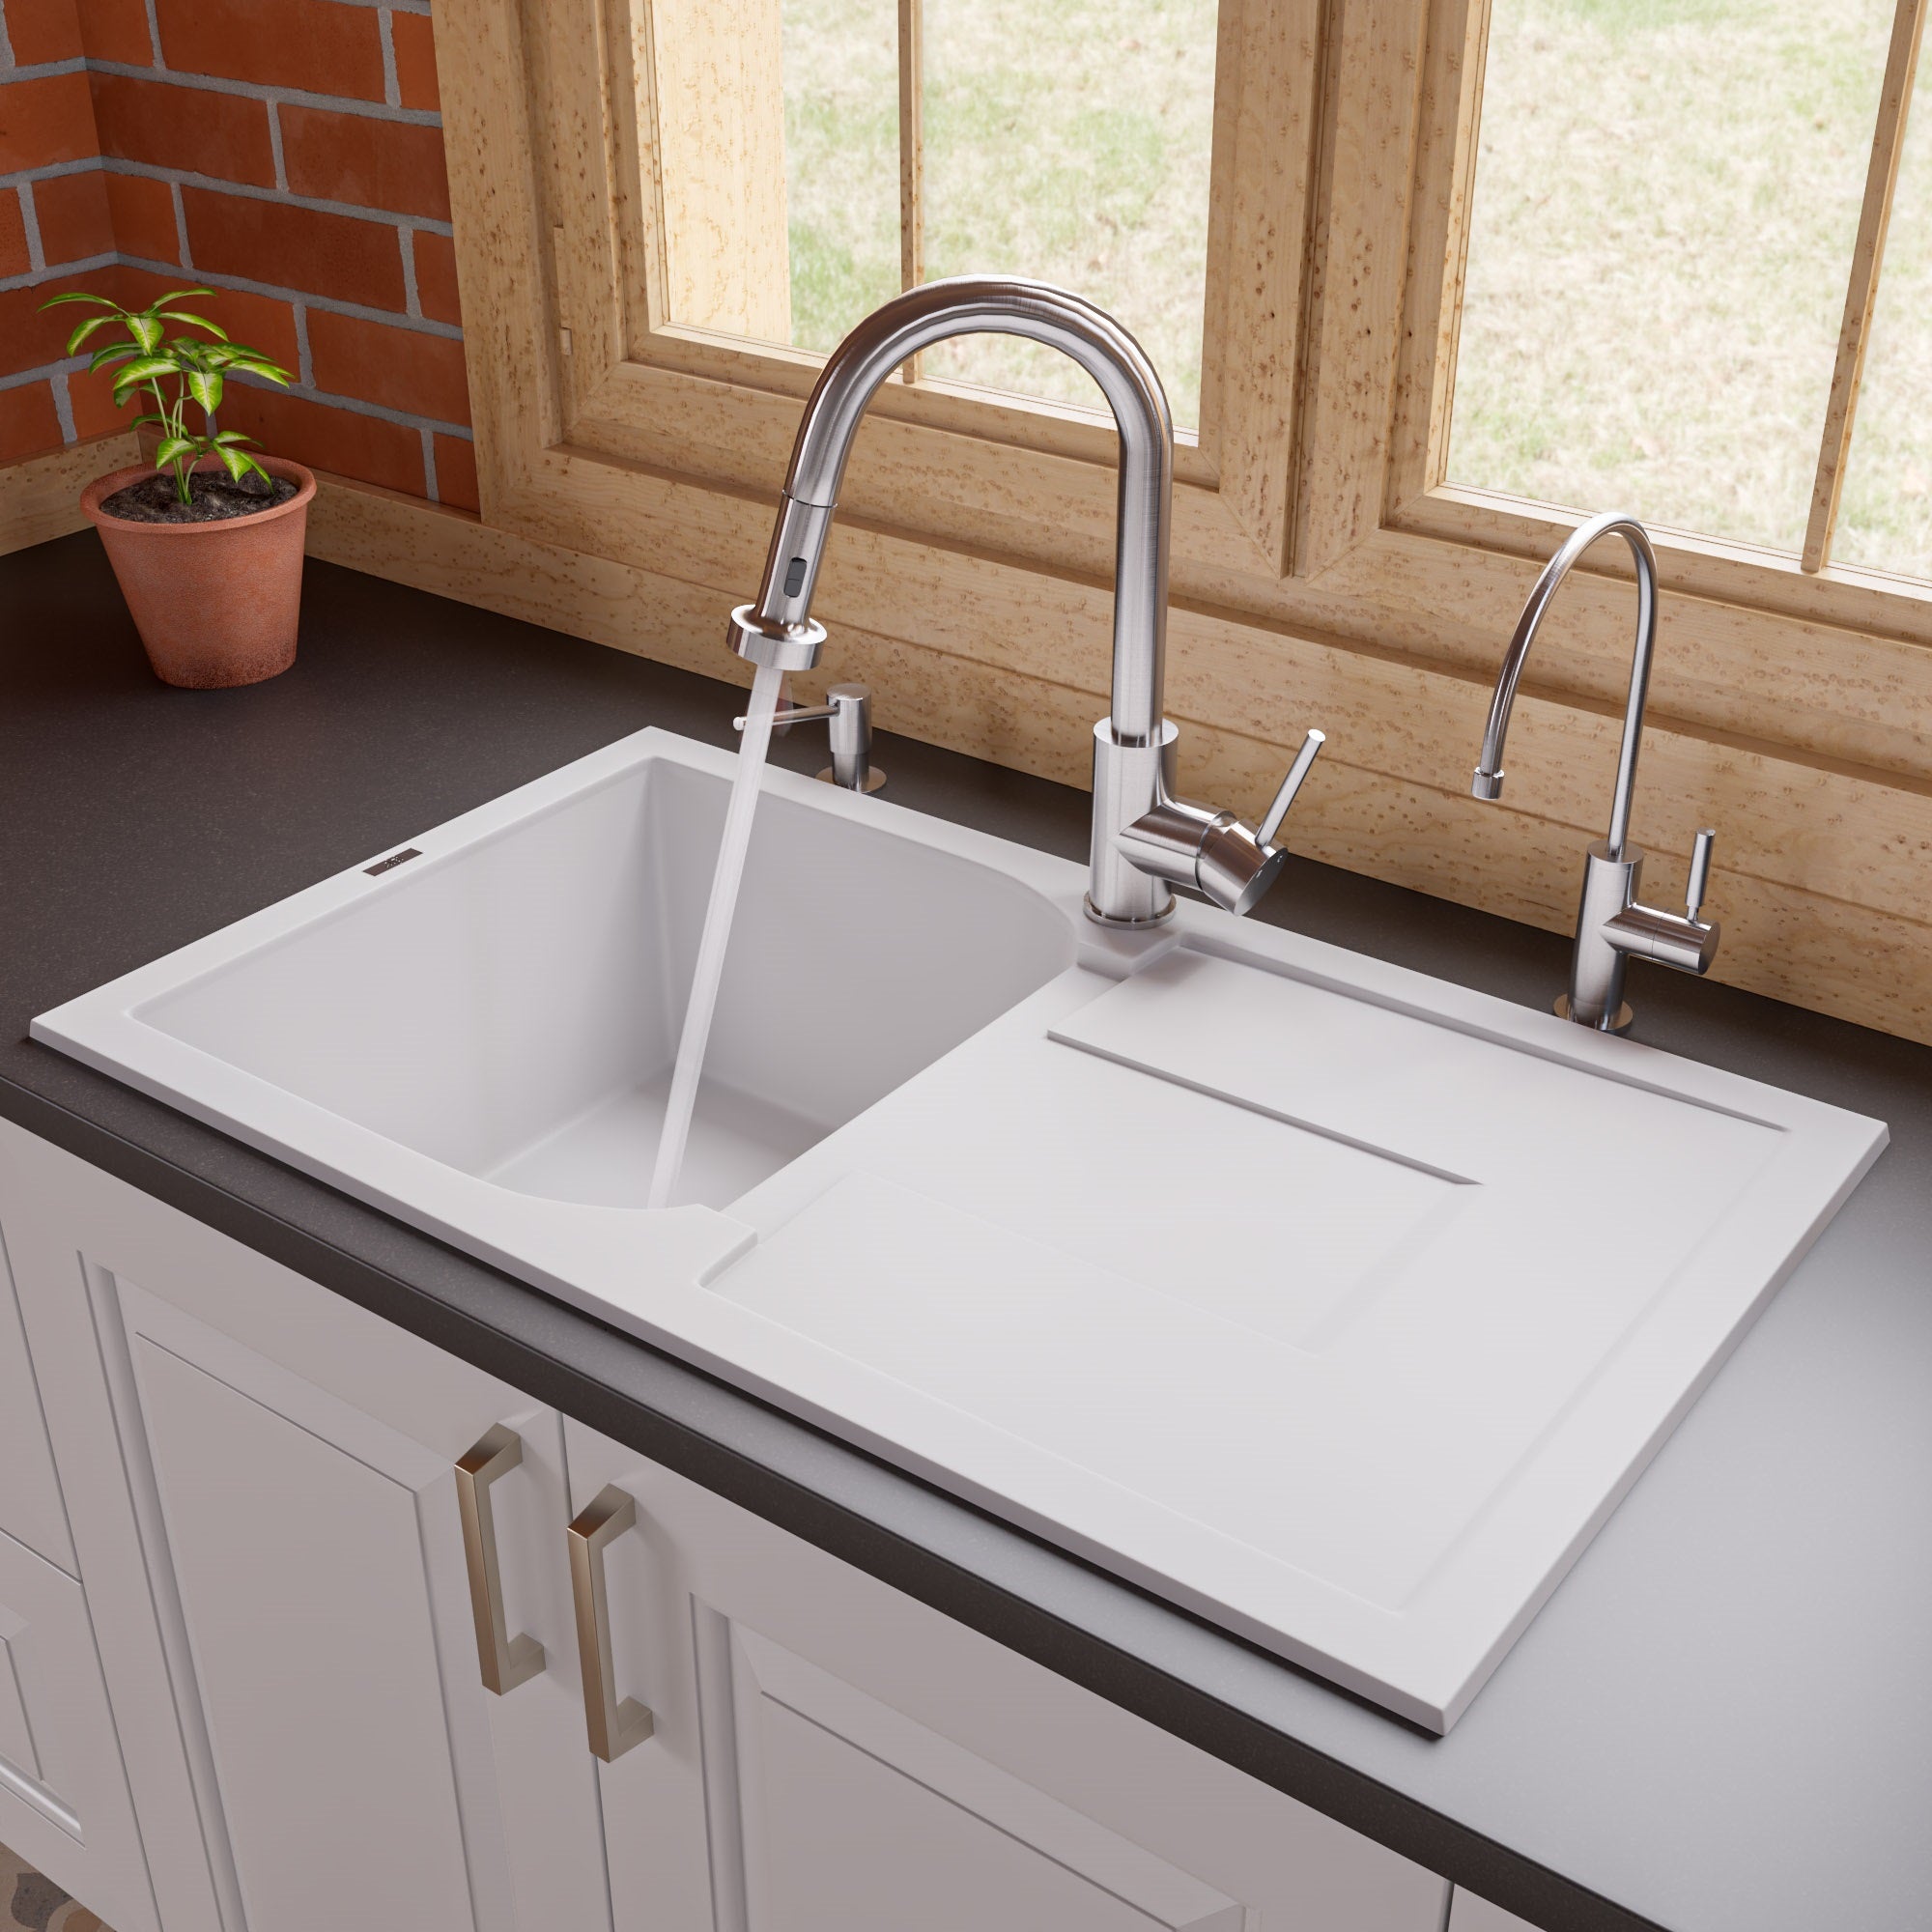 Drainboard Sink: How to Find the Best One  